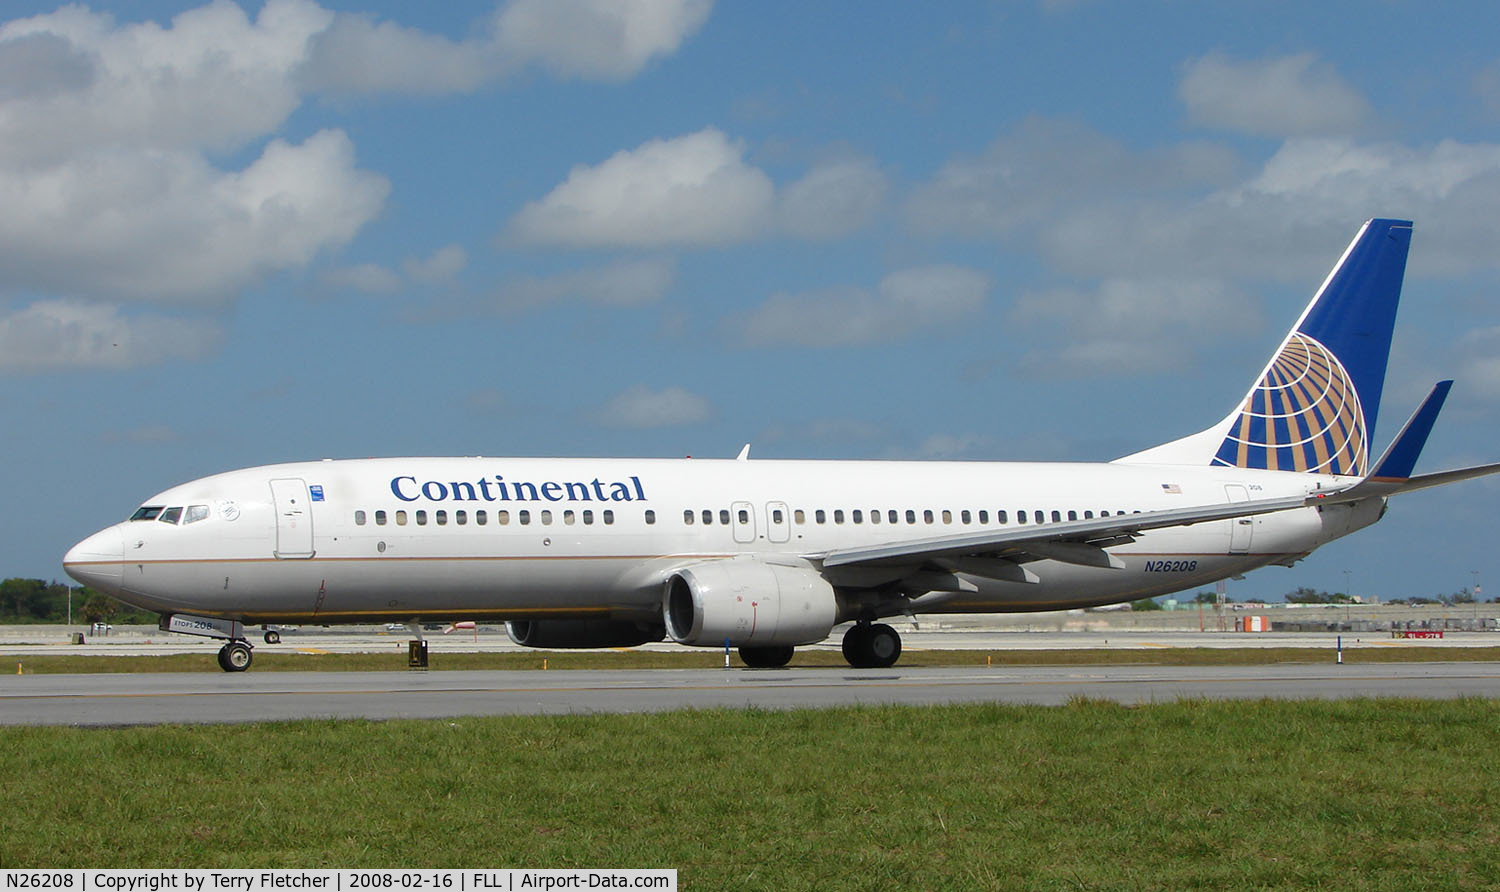 N26208, 2000 Boeing 737-824 C/N 30580, Continental B737 about to depart FLL